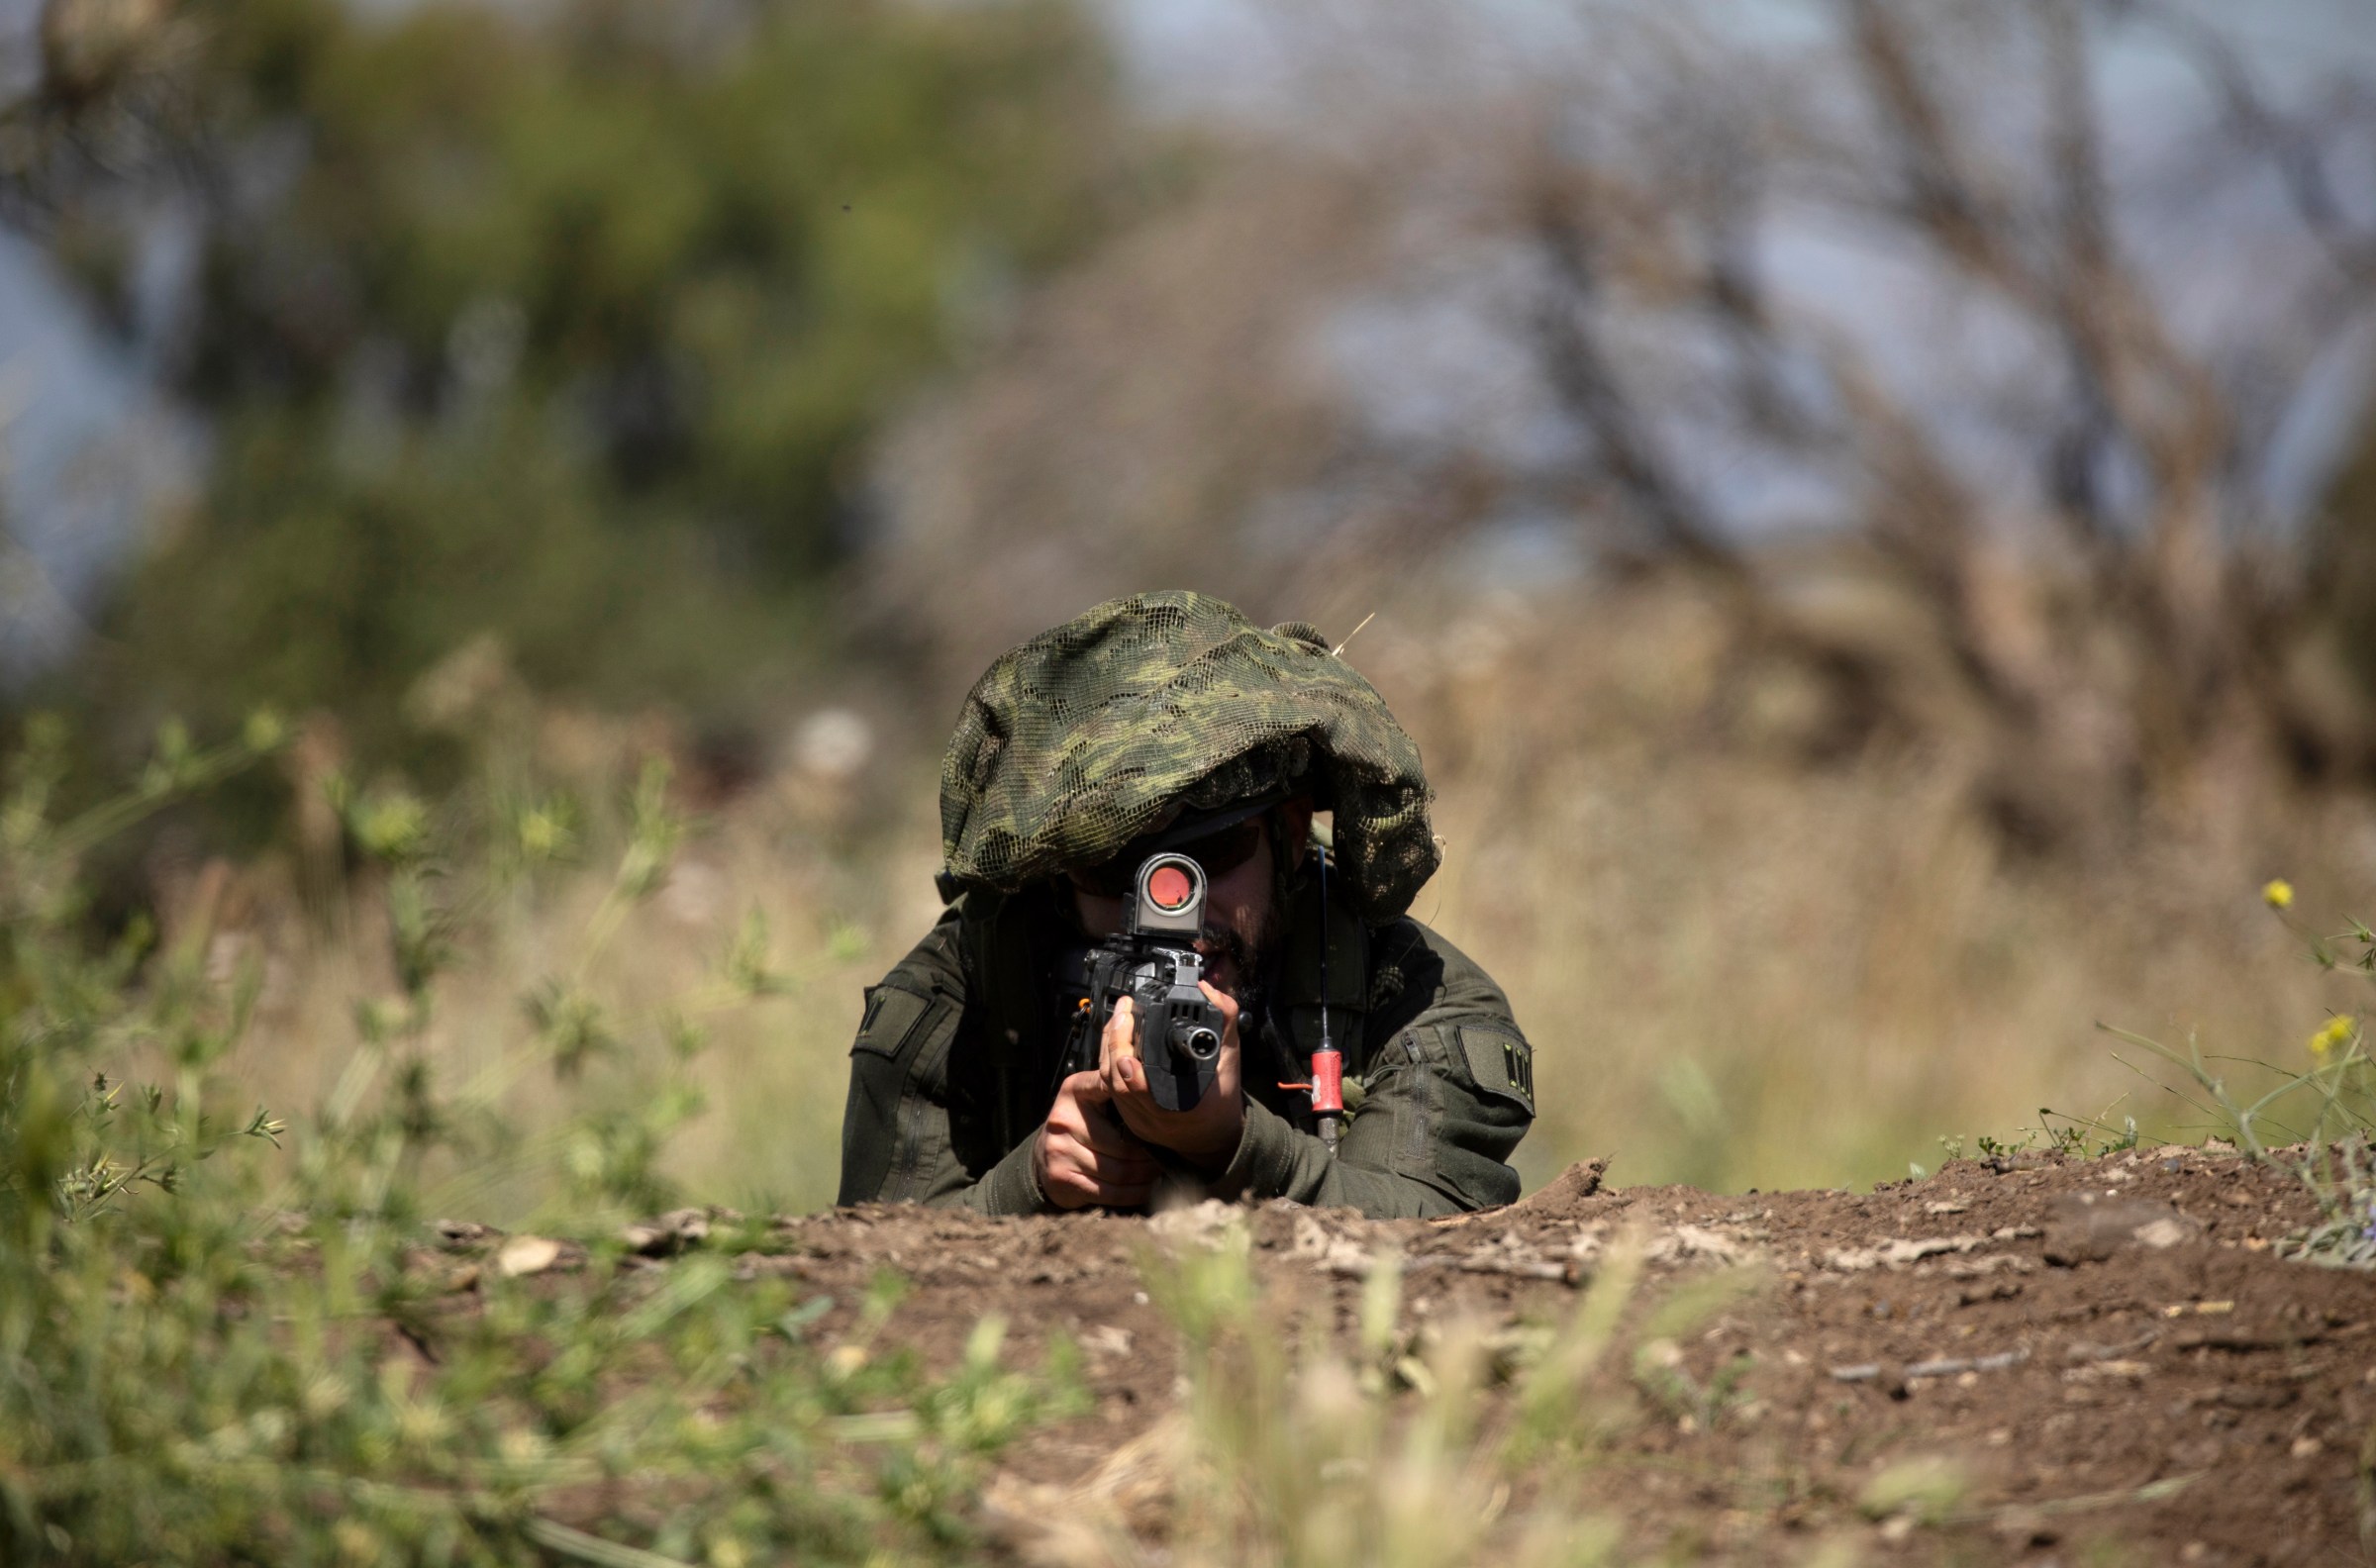 An Israeli soldier lying on the ground amid shrubs points a rifle directly at the camera.